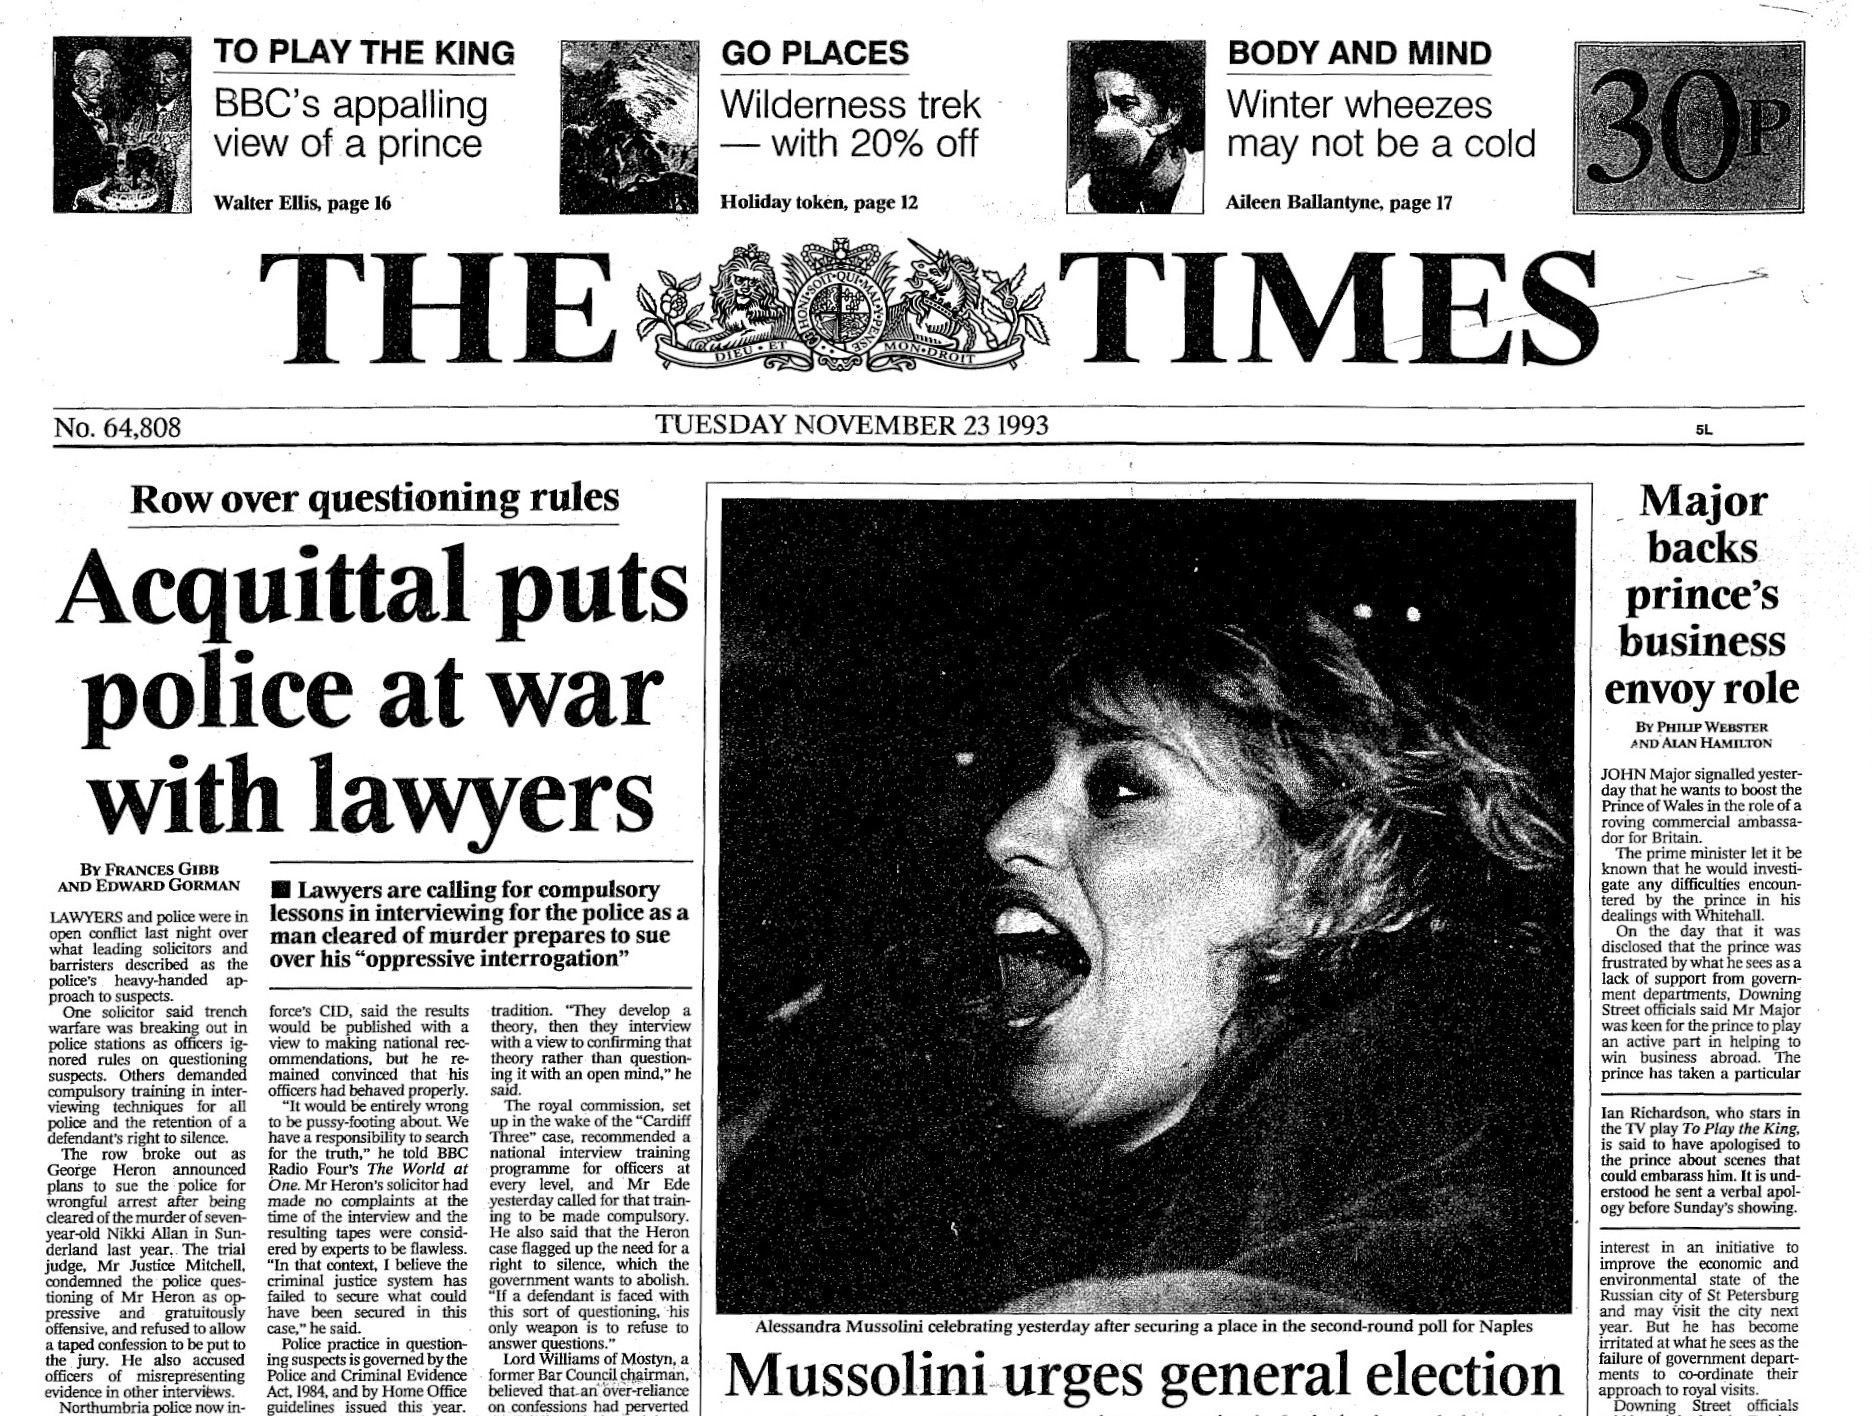 Front page of The Times 23/11/93 - top headline Acquittal puts police at war with lawyers 